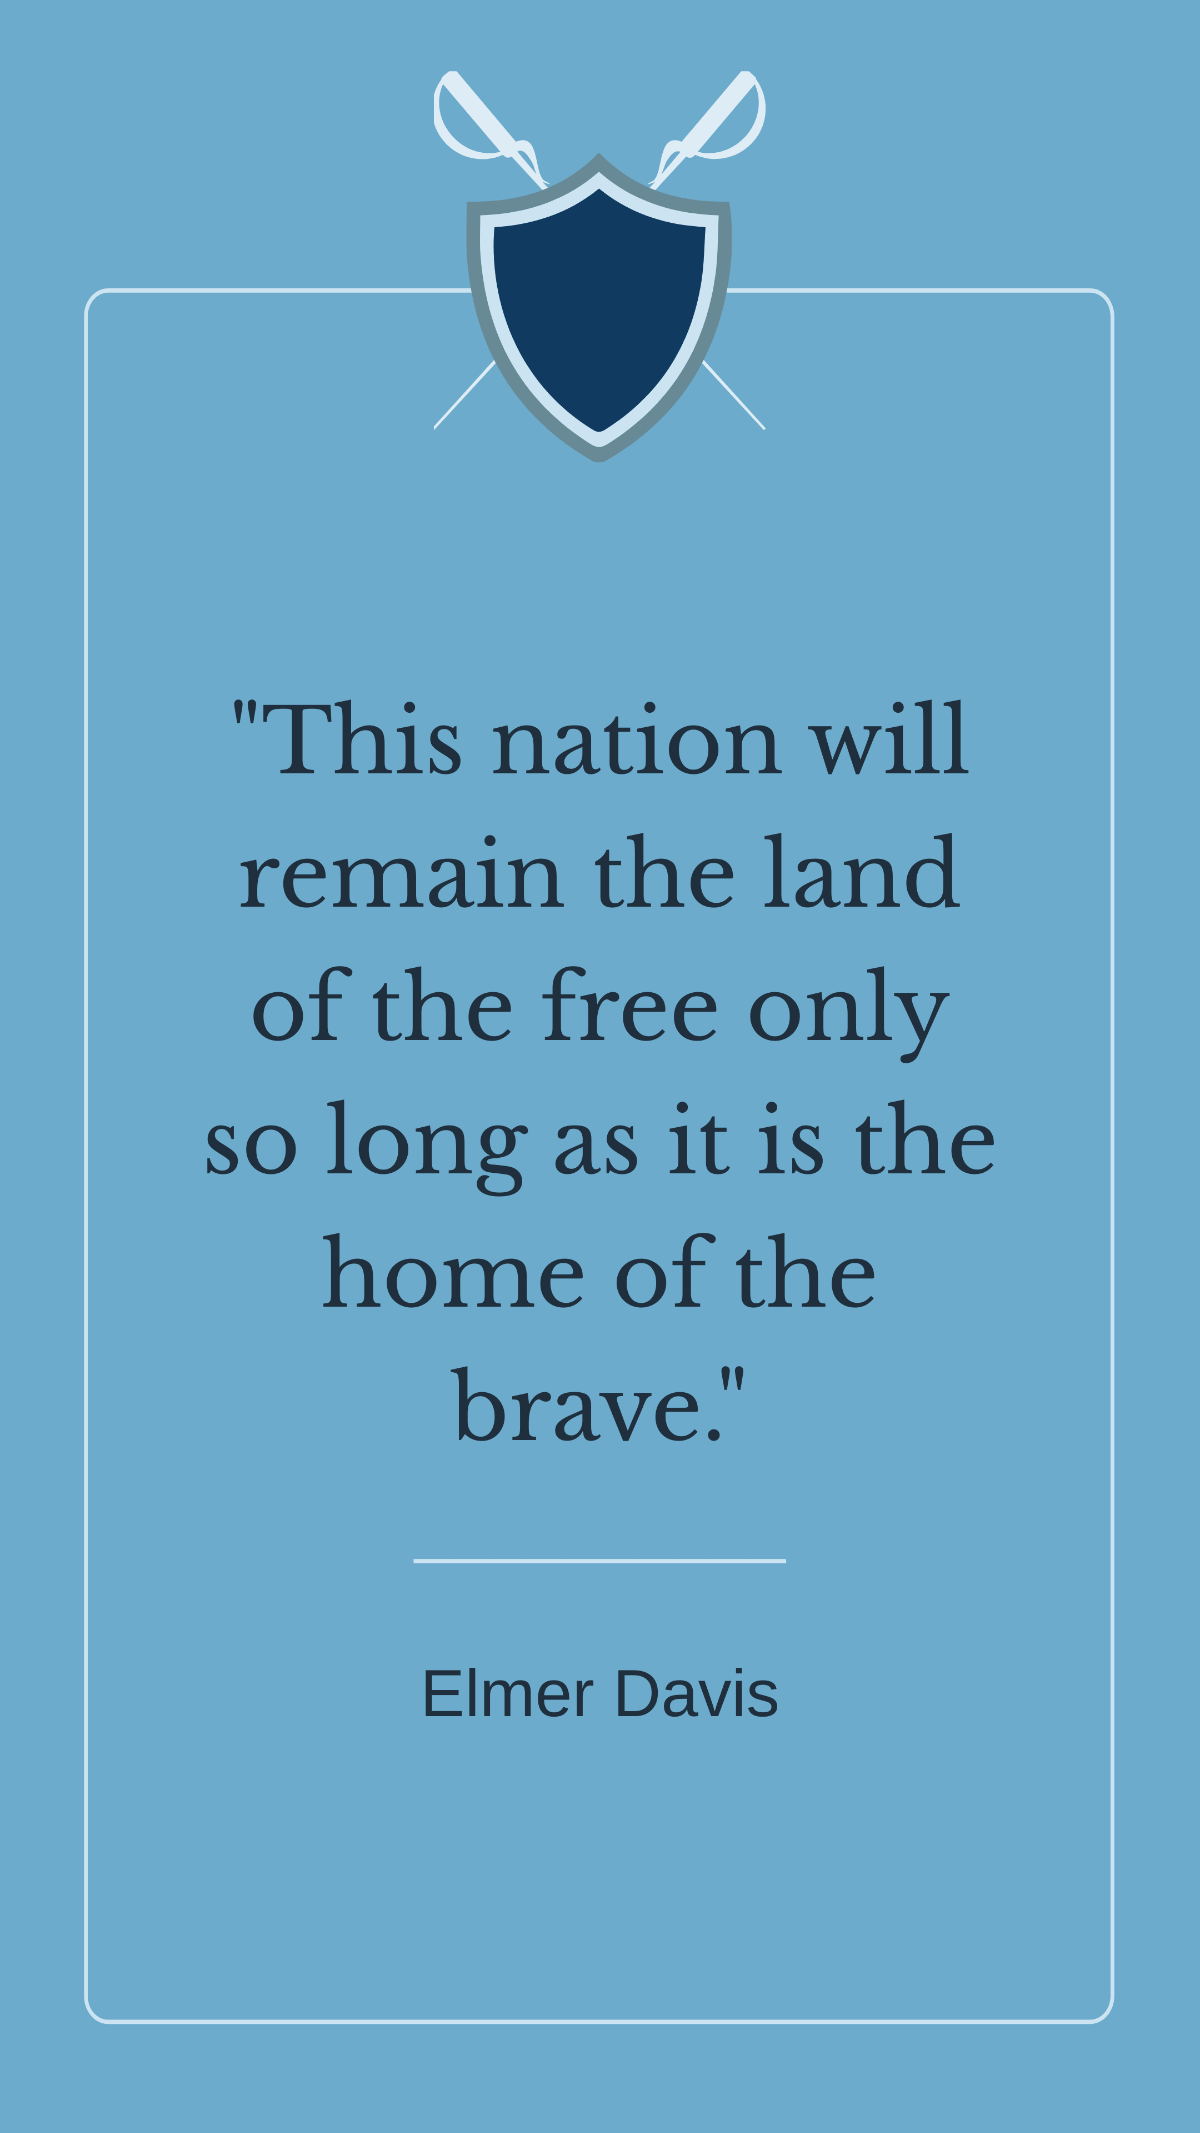 Elmer Davis - This nation will remain the land of the only so long as it is the home of the brave